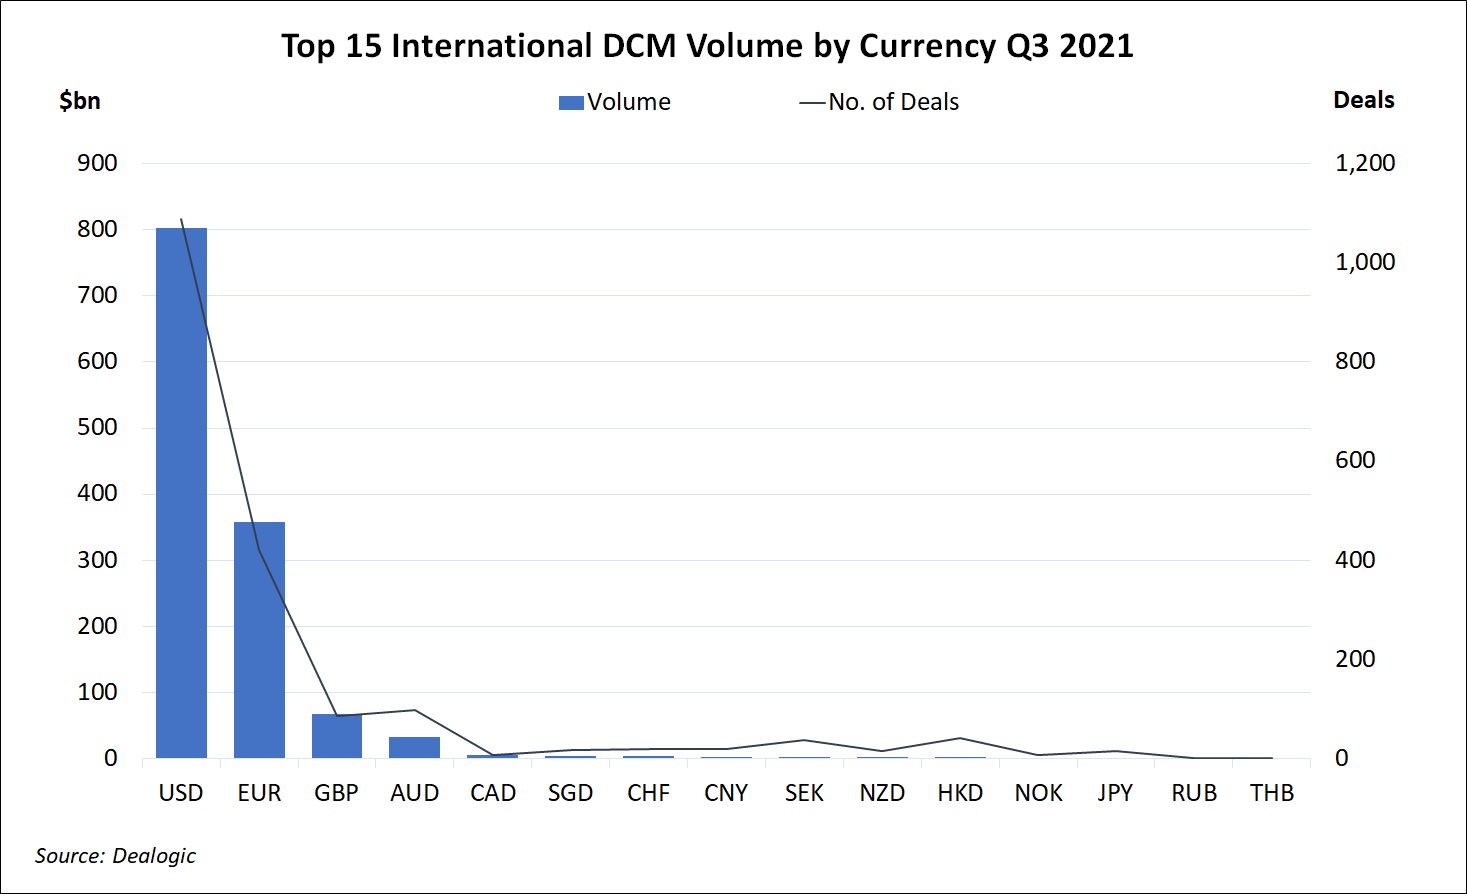 Top 15 International DCM Volume by Currency 2021 Q2